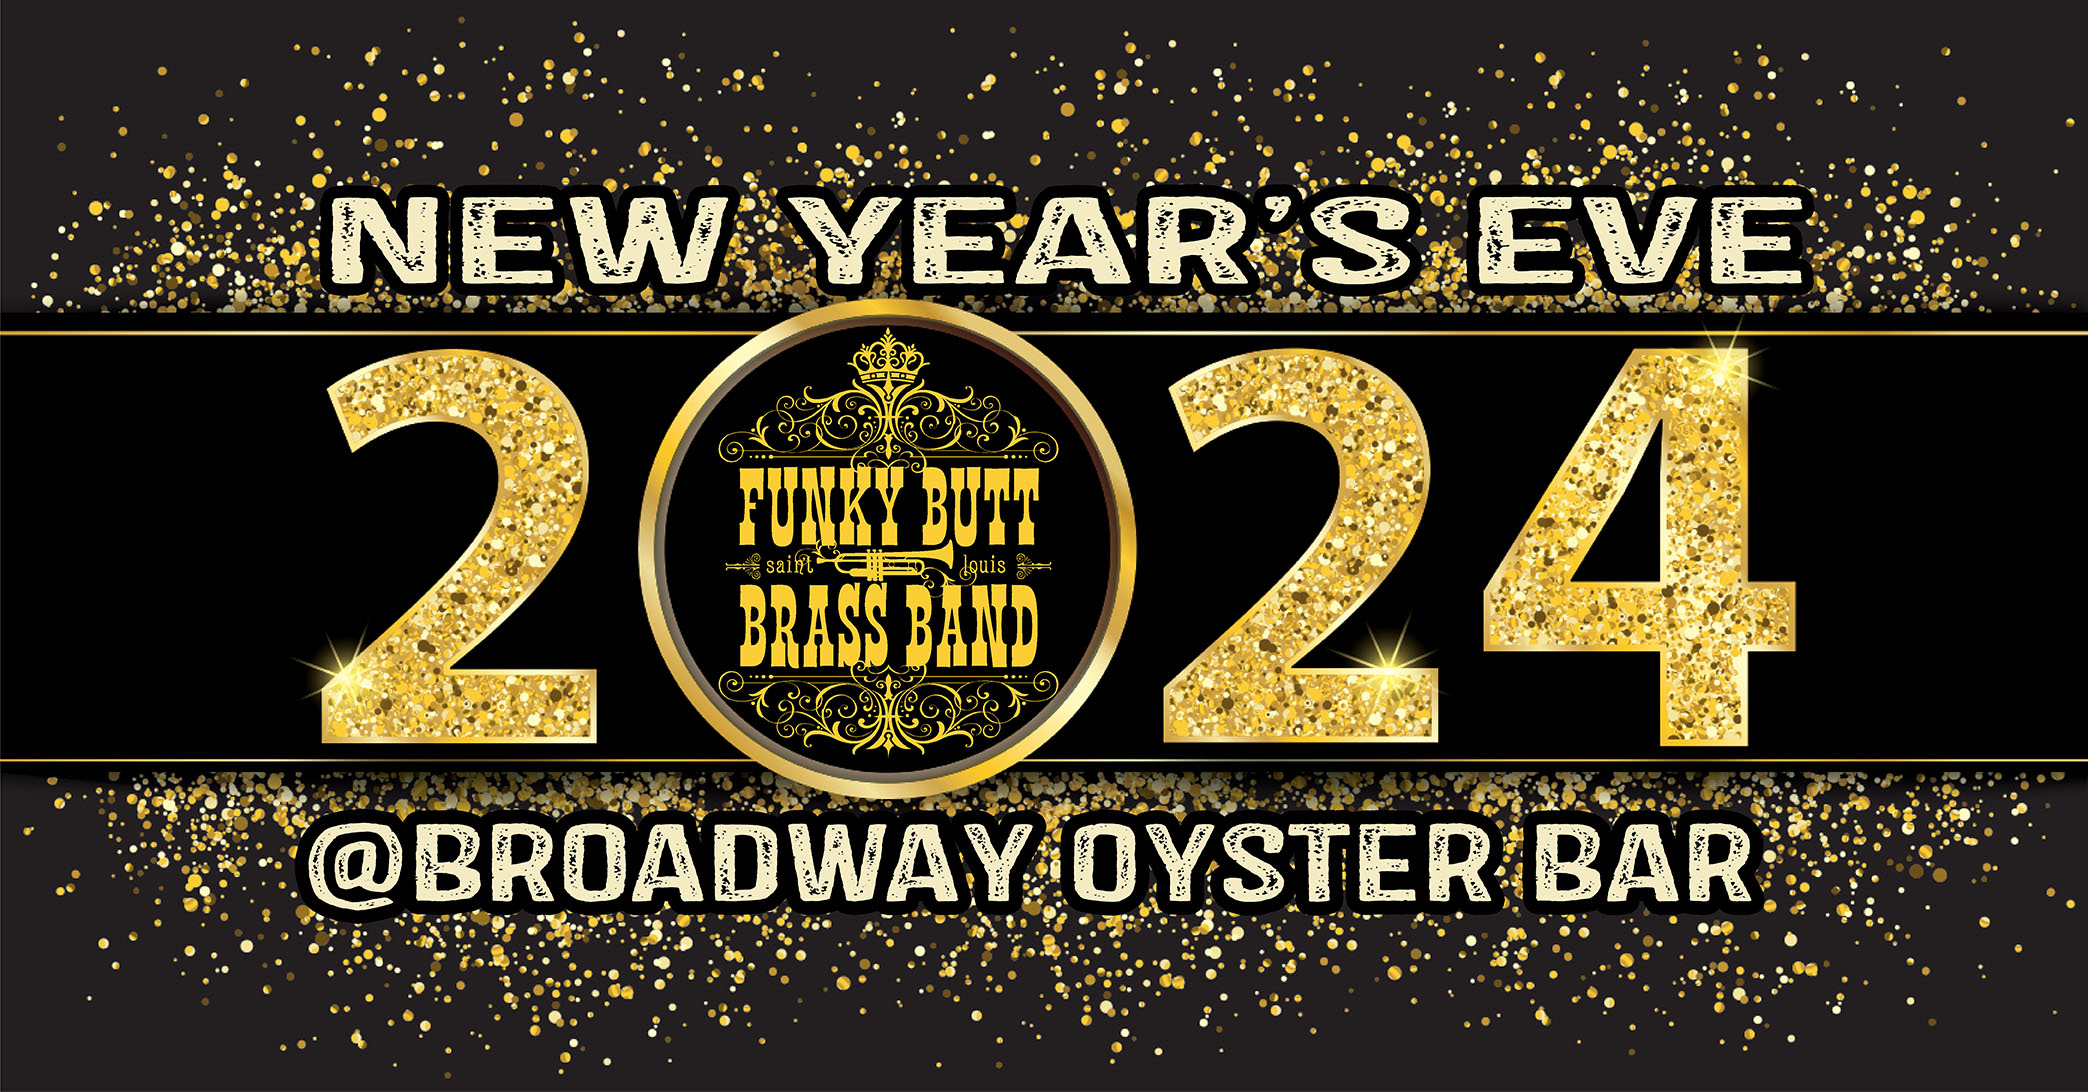 Broadway-Oyster-Bar  New Year's Eve with Funky Butt Brass Band  image